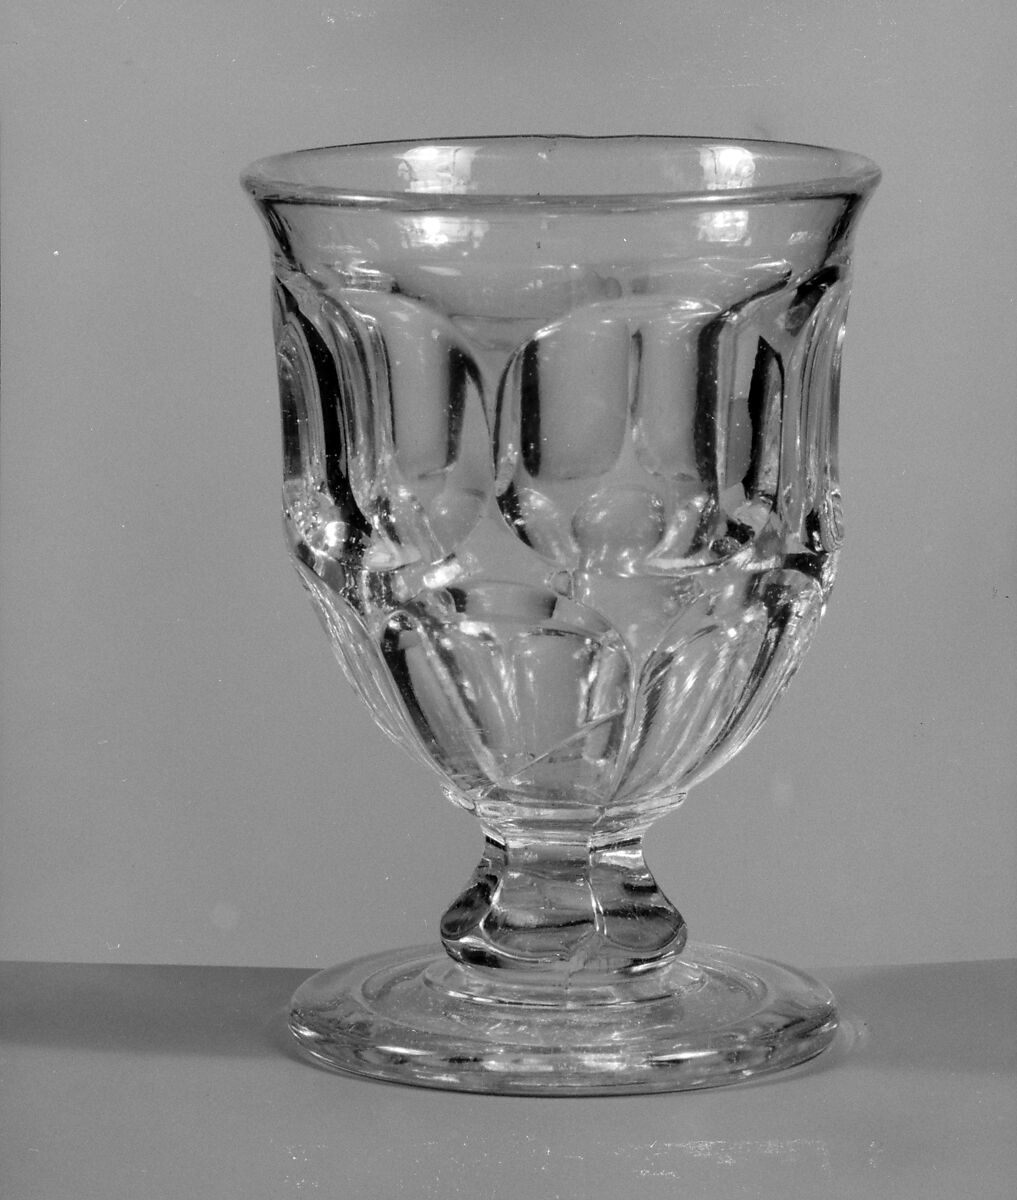 Egg Cup, Pressed glass, American 